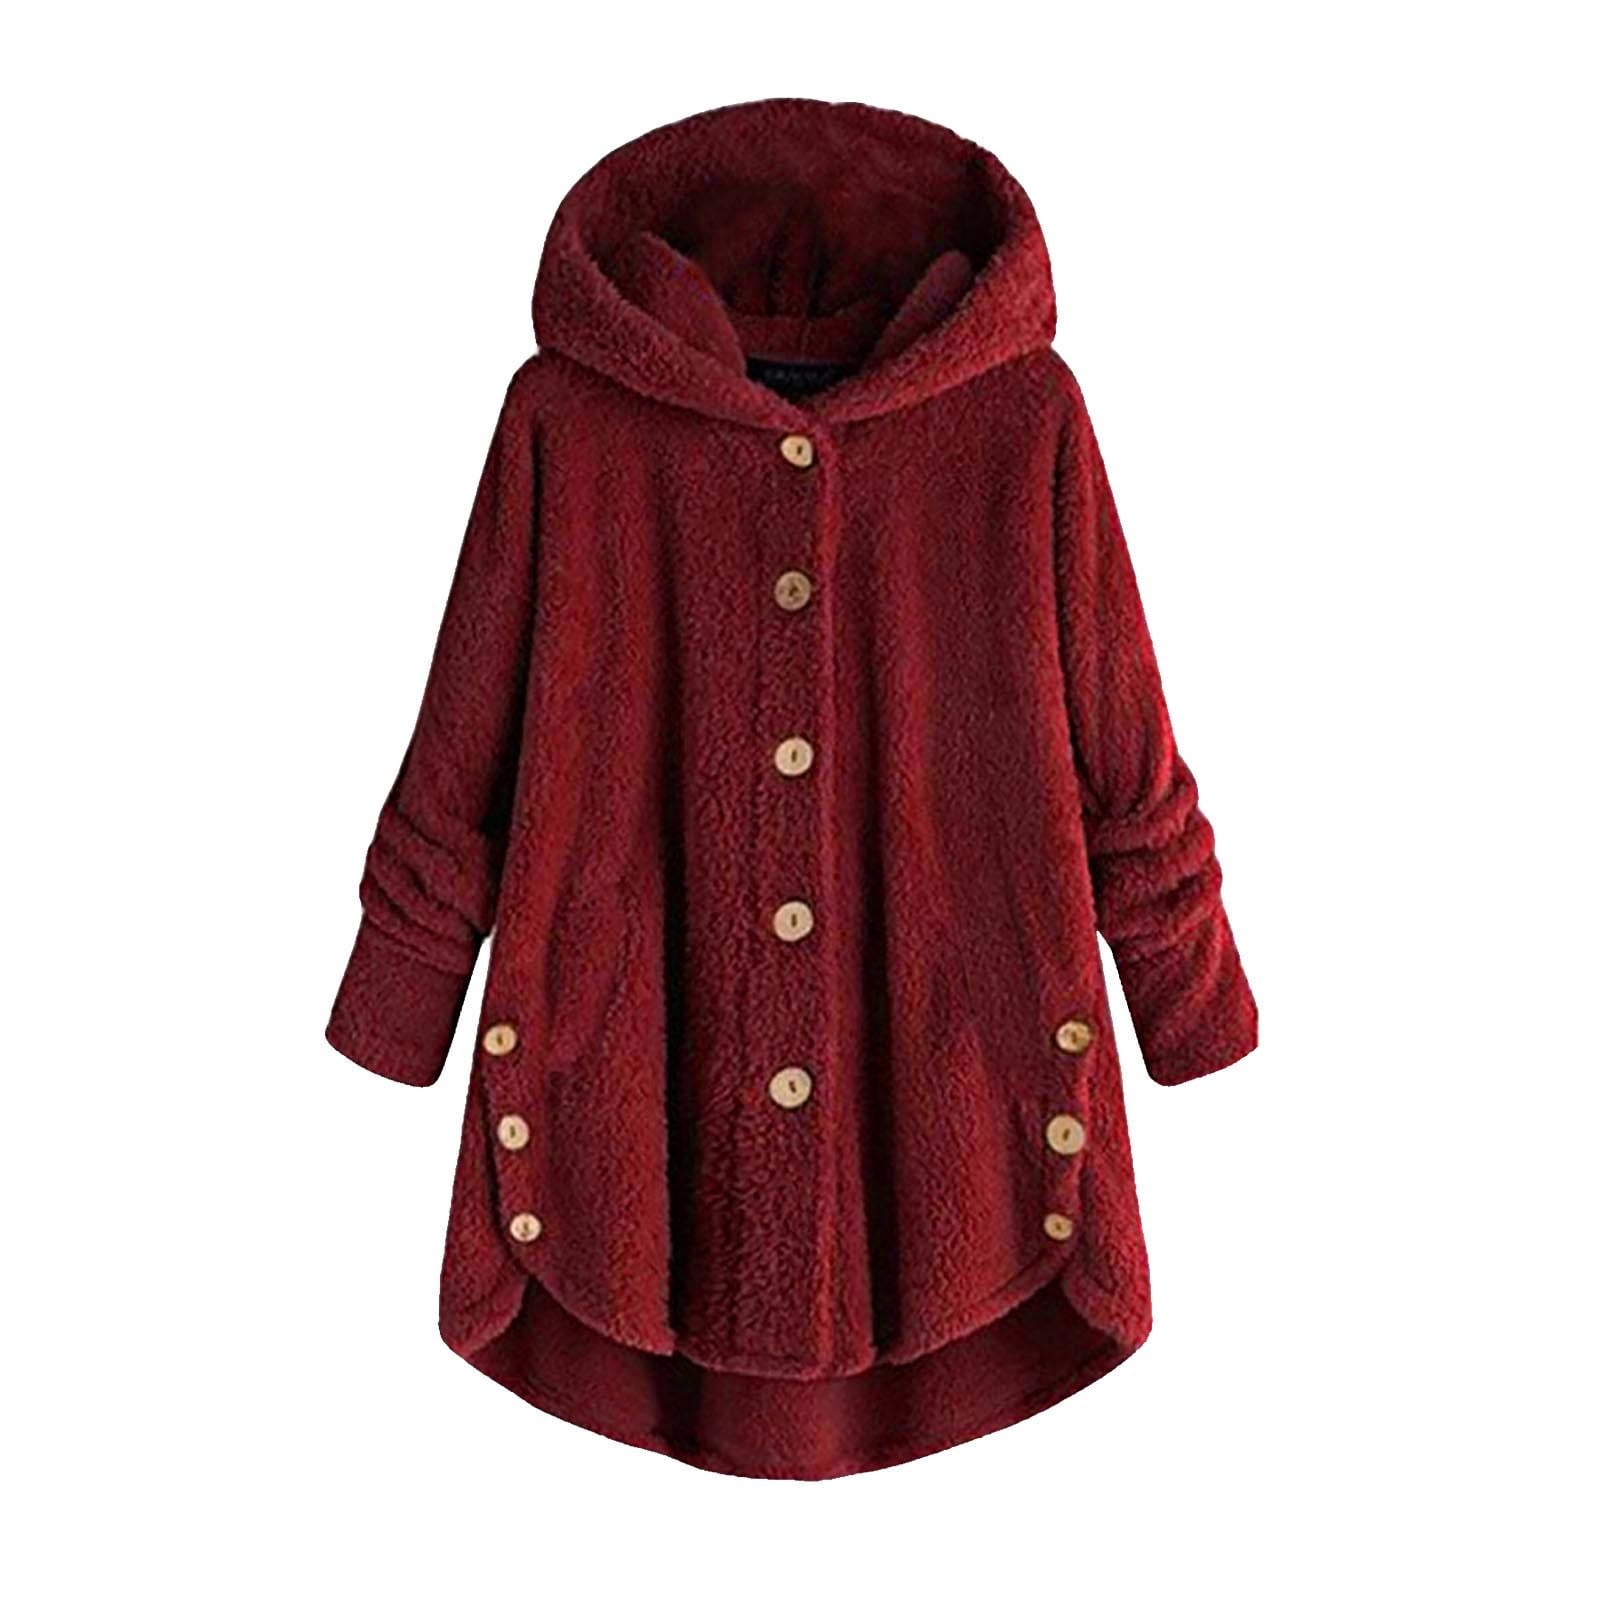 WQJNWEQ Outerwear for Women Plus Size Button Plush Hooded Loose ...